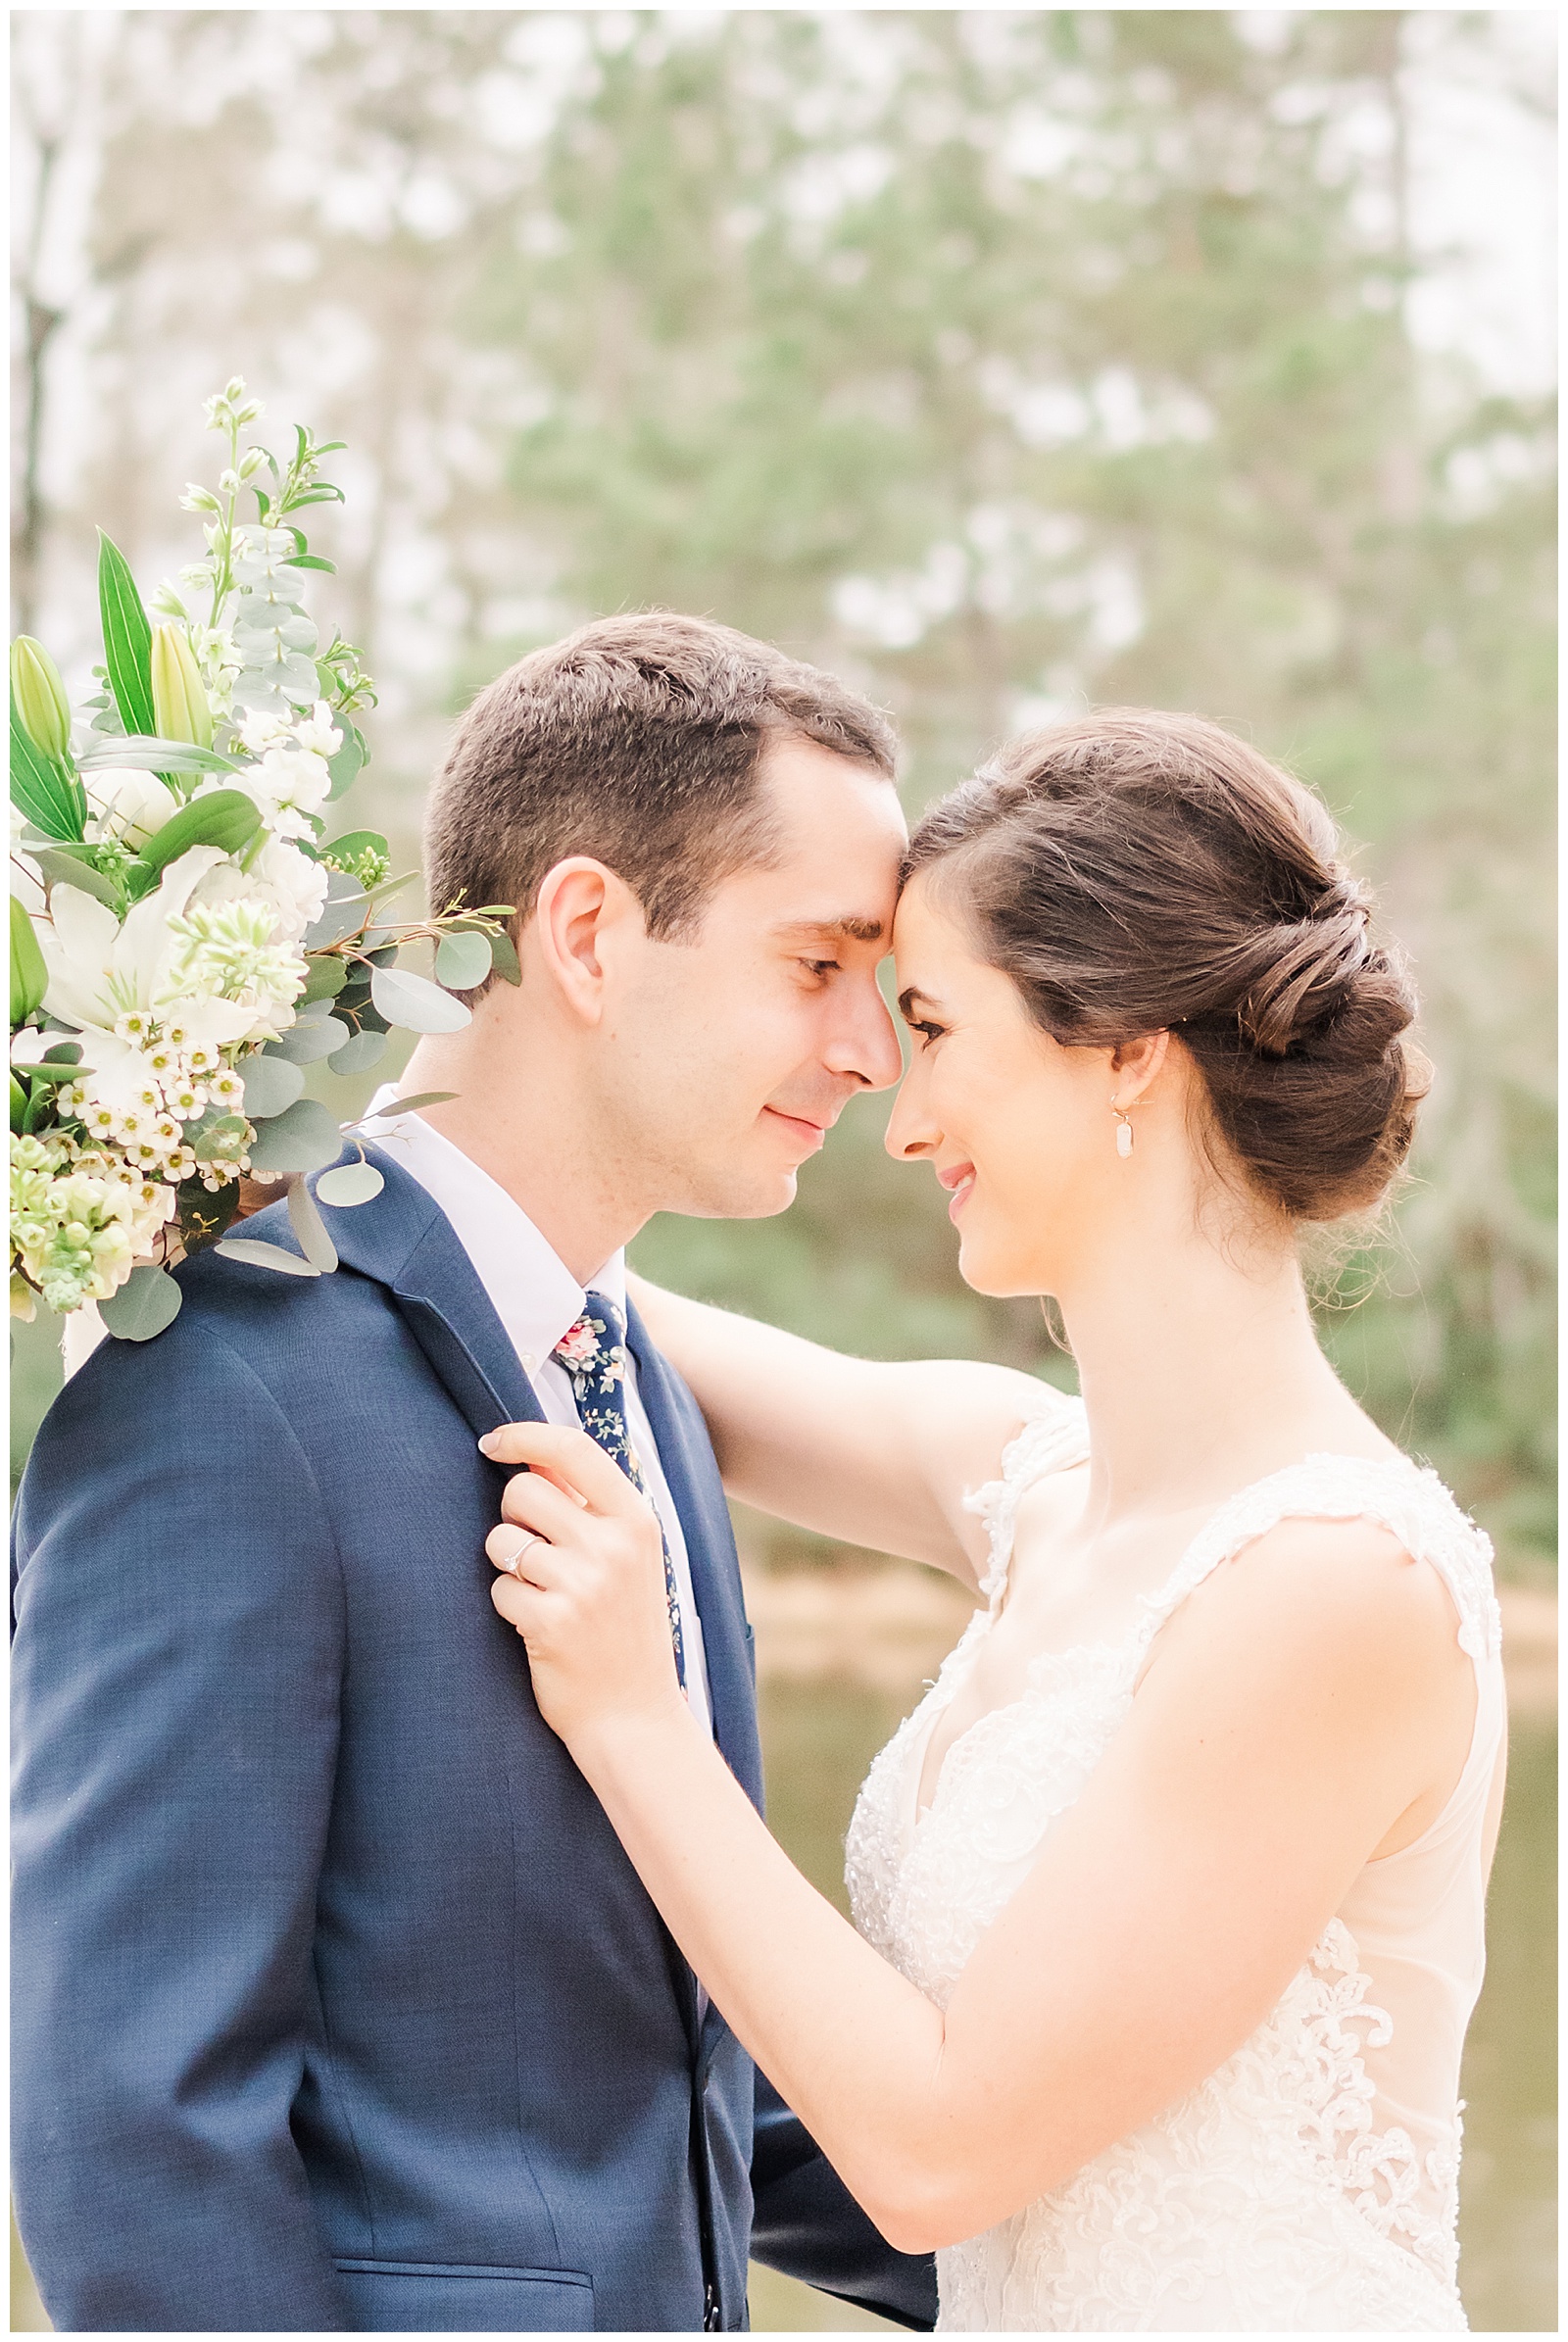 A Winter Wedding Portrait in The Woodlands Texas